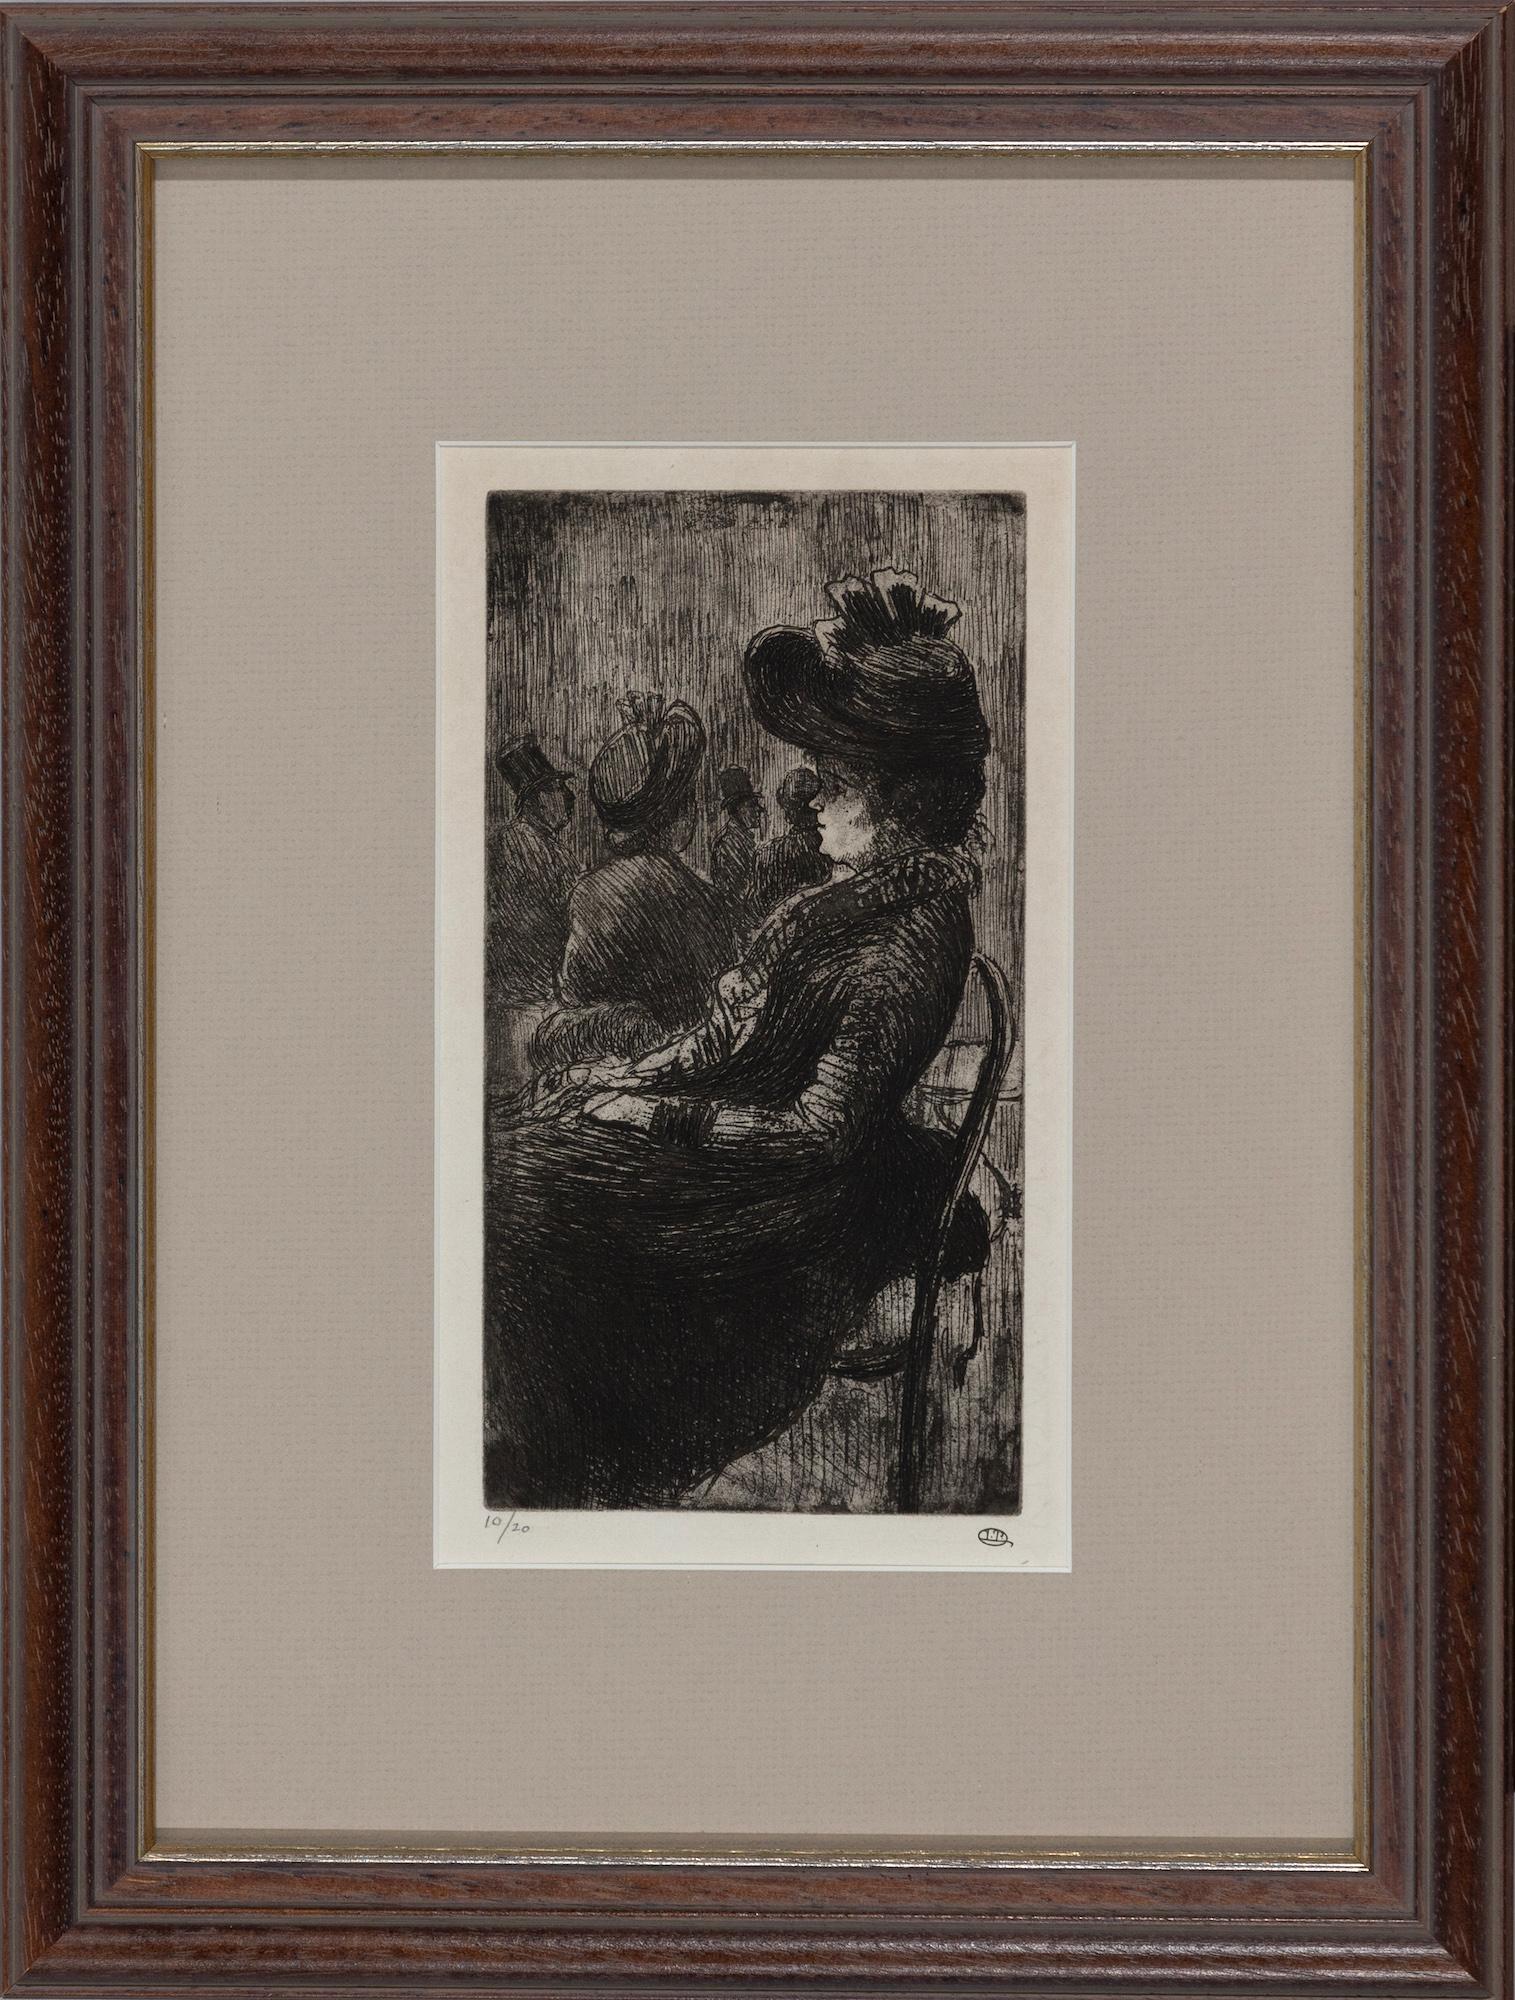 Une Femme Assise by Lucien Pissarro (1863-1944)
Etching
23 x 13 cm (9 x 5 ¹/₈ inches)
Stamped lower right, L.P. and numbered lower left, 10/20

Provenance: John Bensusan Butt
Private collection, UK, gifted from above in 1967

One of the most